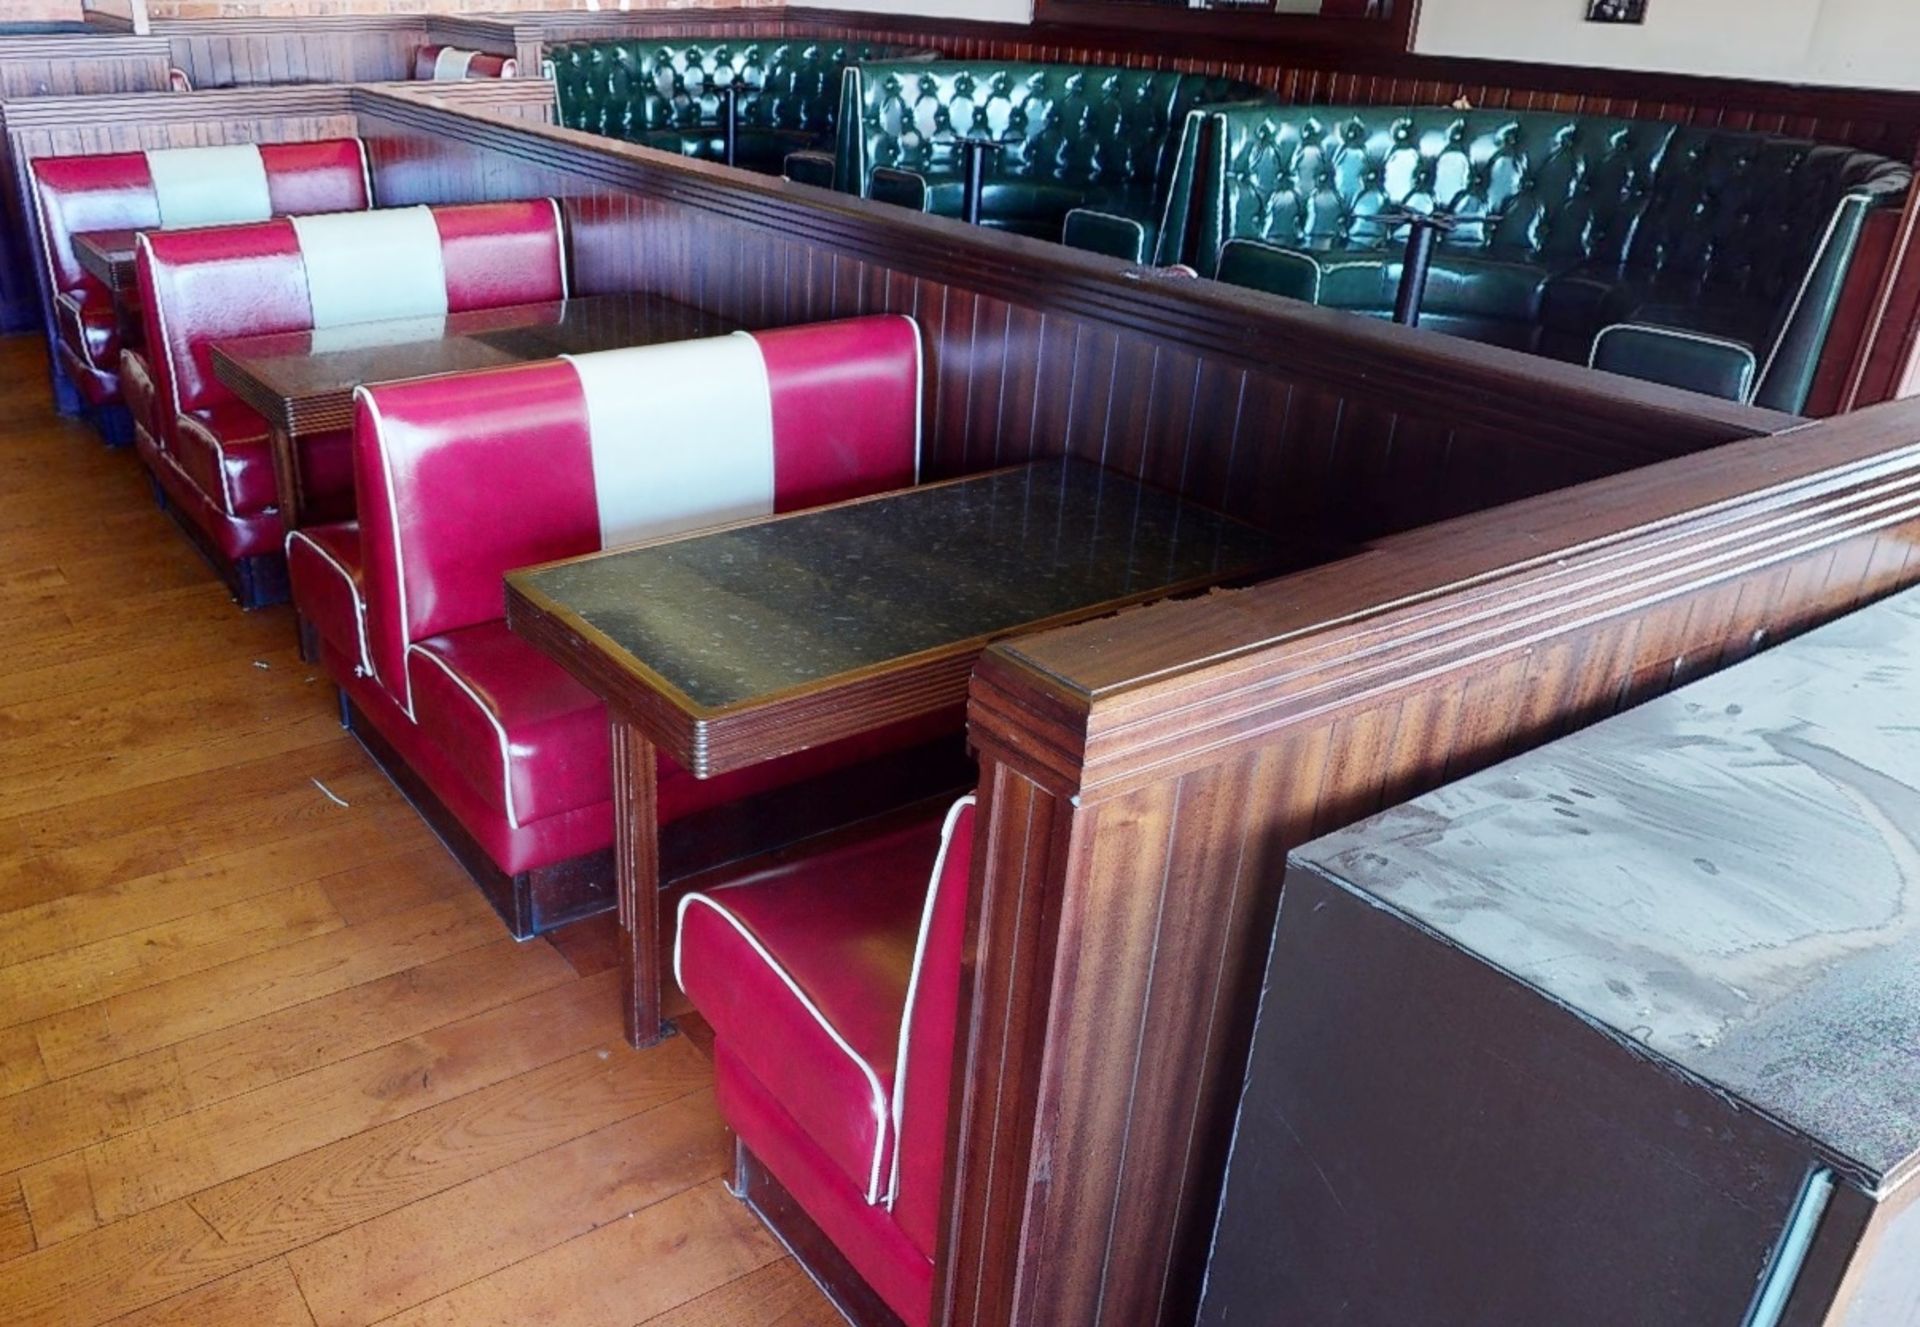 1 x Assorted Lot of Restaurant Seating Benches - Seats 18 Persons - American Diner Style in Red